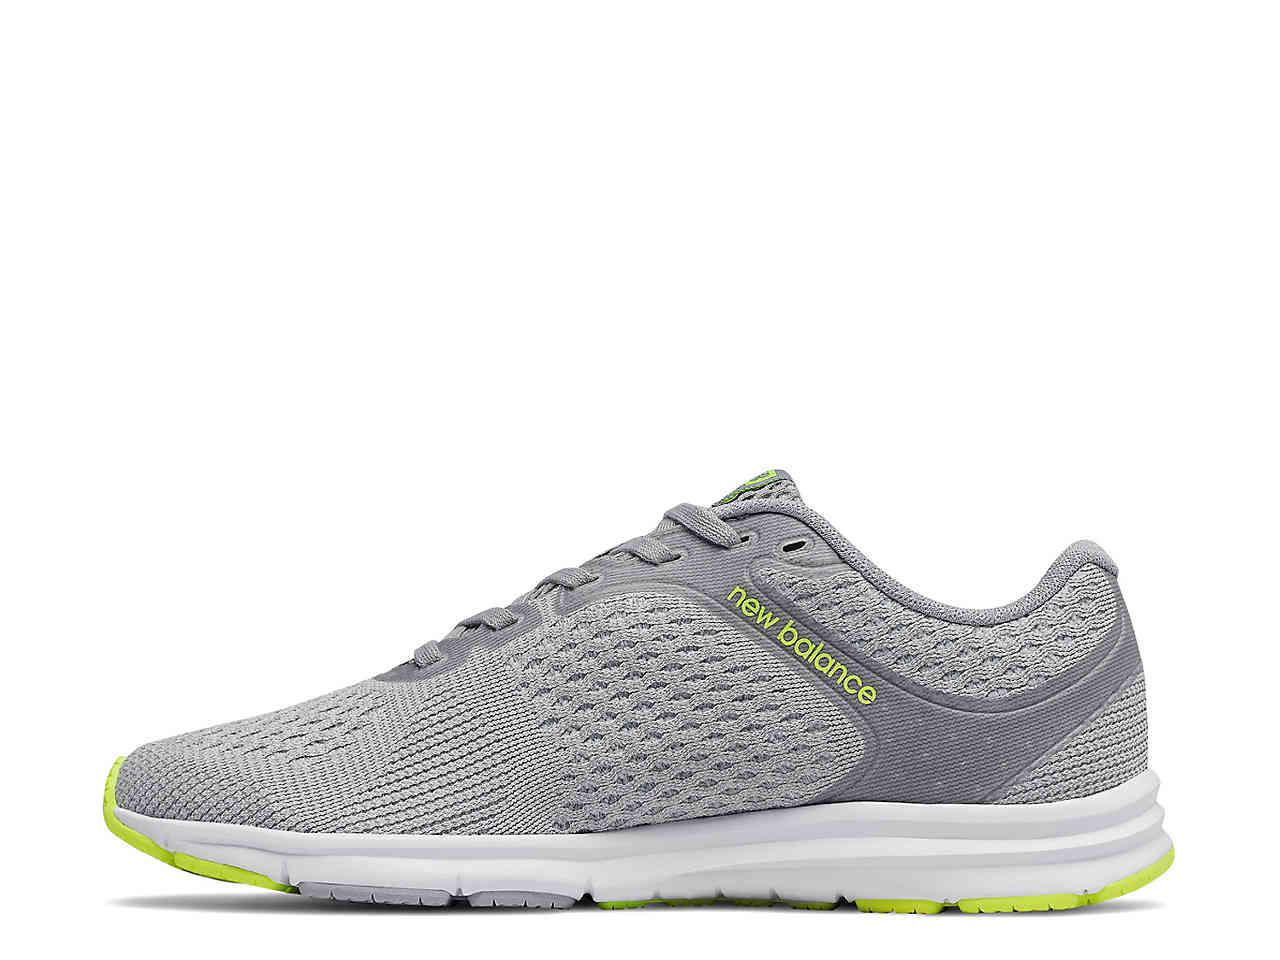 New Balance Synthetic 635 V2 Lightweight Running Shoe in Grey/Lime Green  (Gray) | Lyst